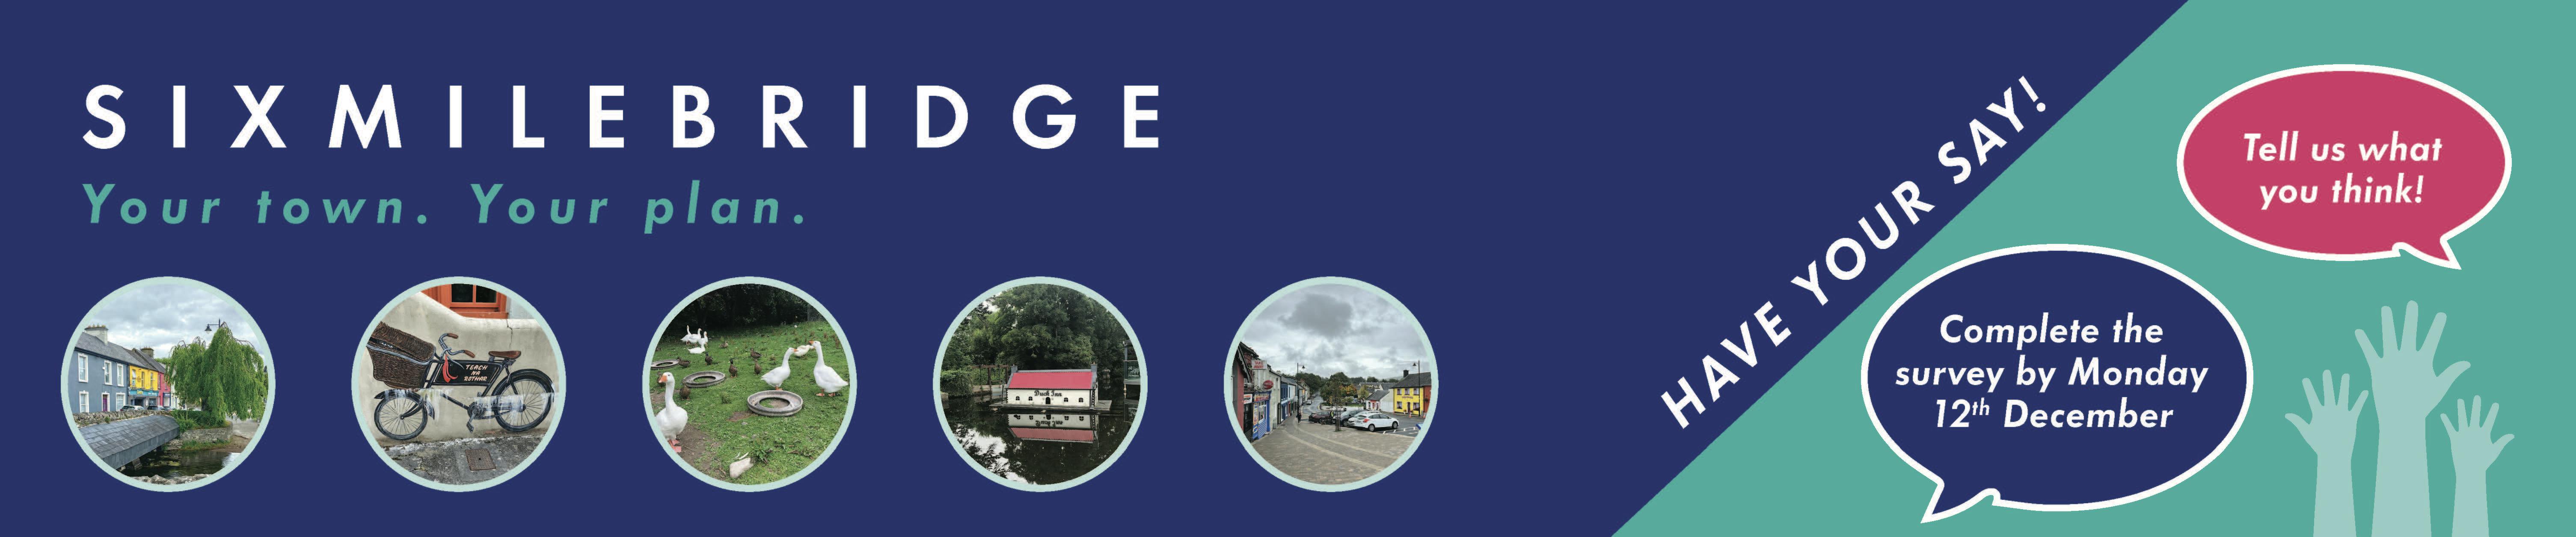 Sixmilebridge. Your town. Your plan. Have your say! Complete the survey by Monday 5th of December. Tell us what you think!